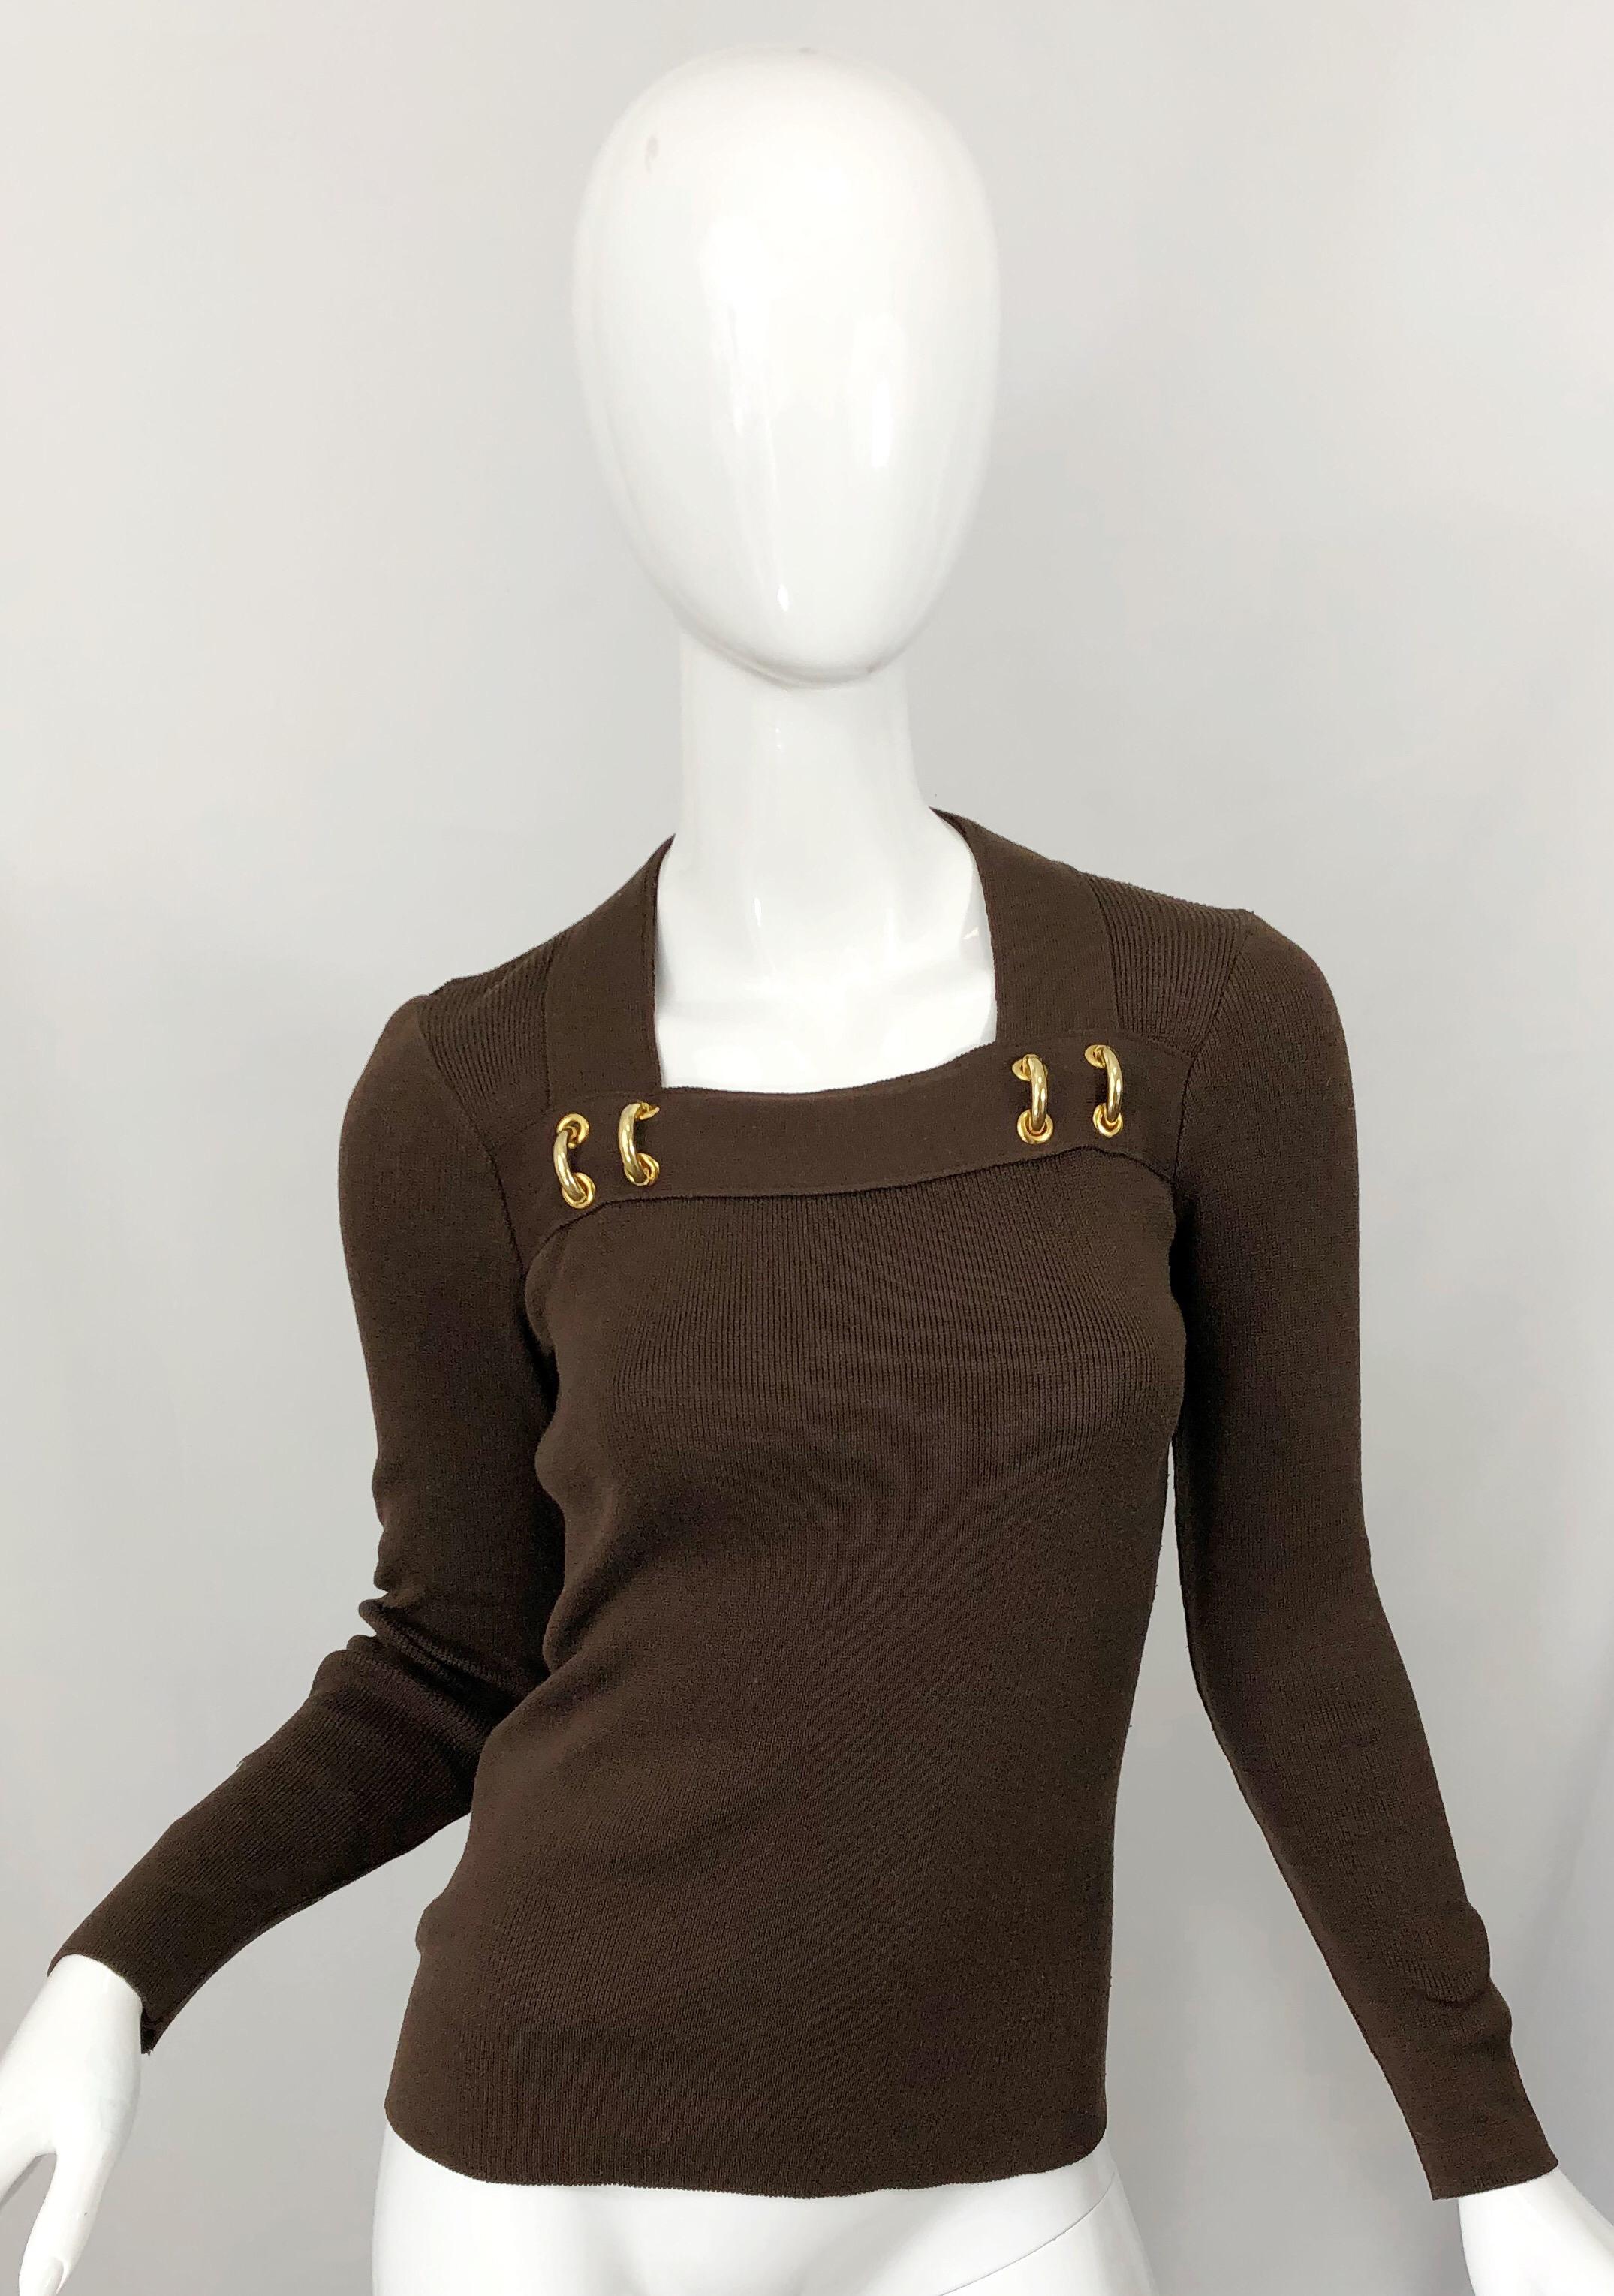 Chic vintage 70s GINA - PETITE MARMITE Palm Beach, FL chocolate brown cotton knit sweater top! 
Petite Marmite was a upscale restaurant on Worth Ave. After finding much succes, Geraldine Pucillo opened up a neighboring fashion boutique to cater to